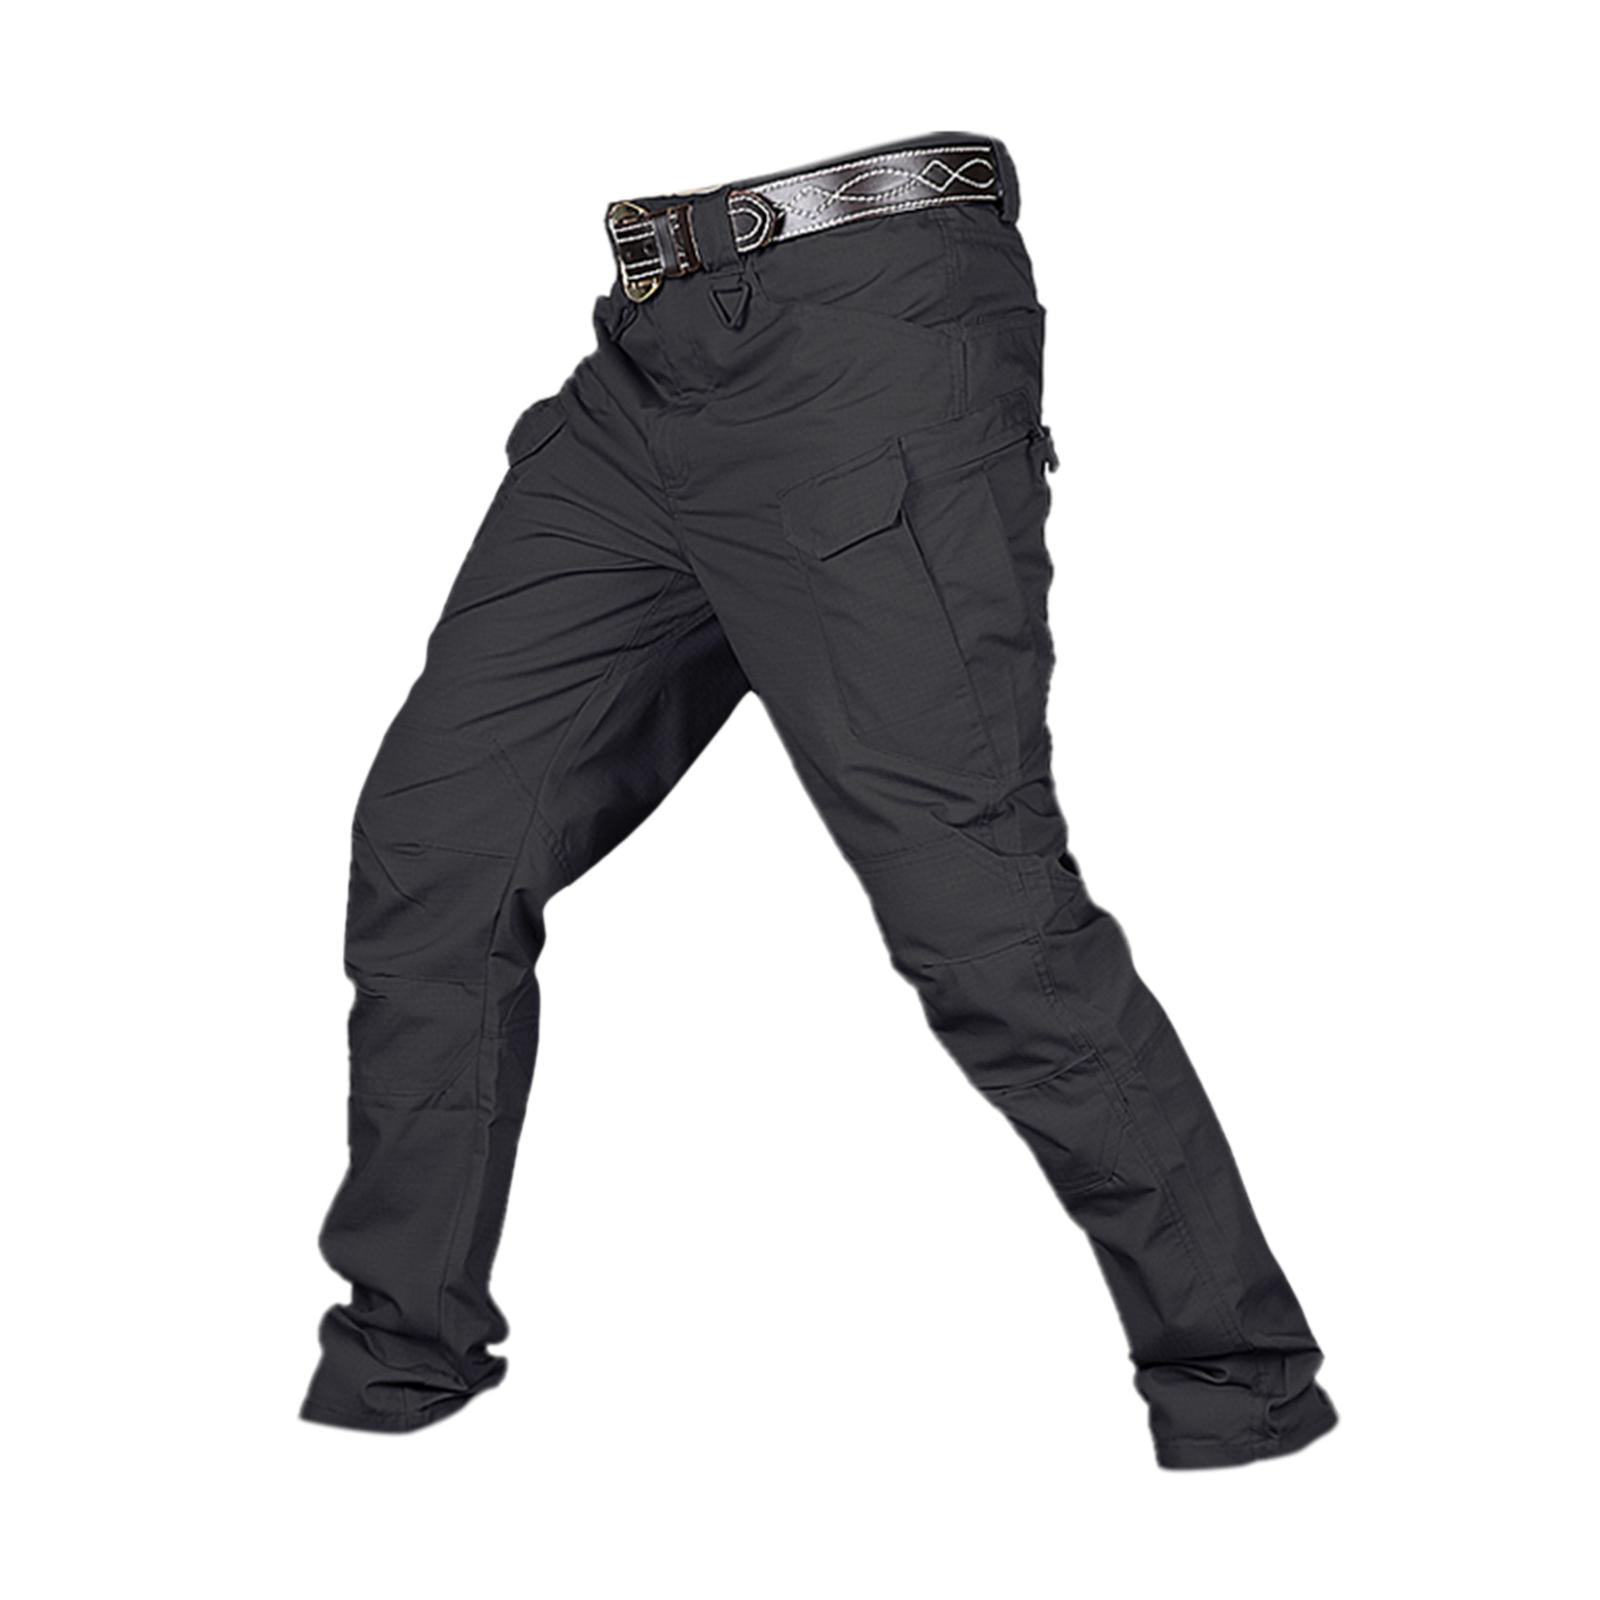 Mens Soft Shell Pants Jogging Hiking Military Tactical Quick Dry Cargo Trousers 